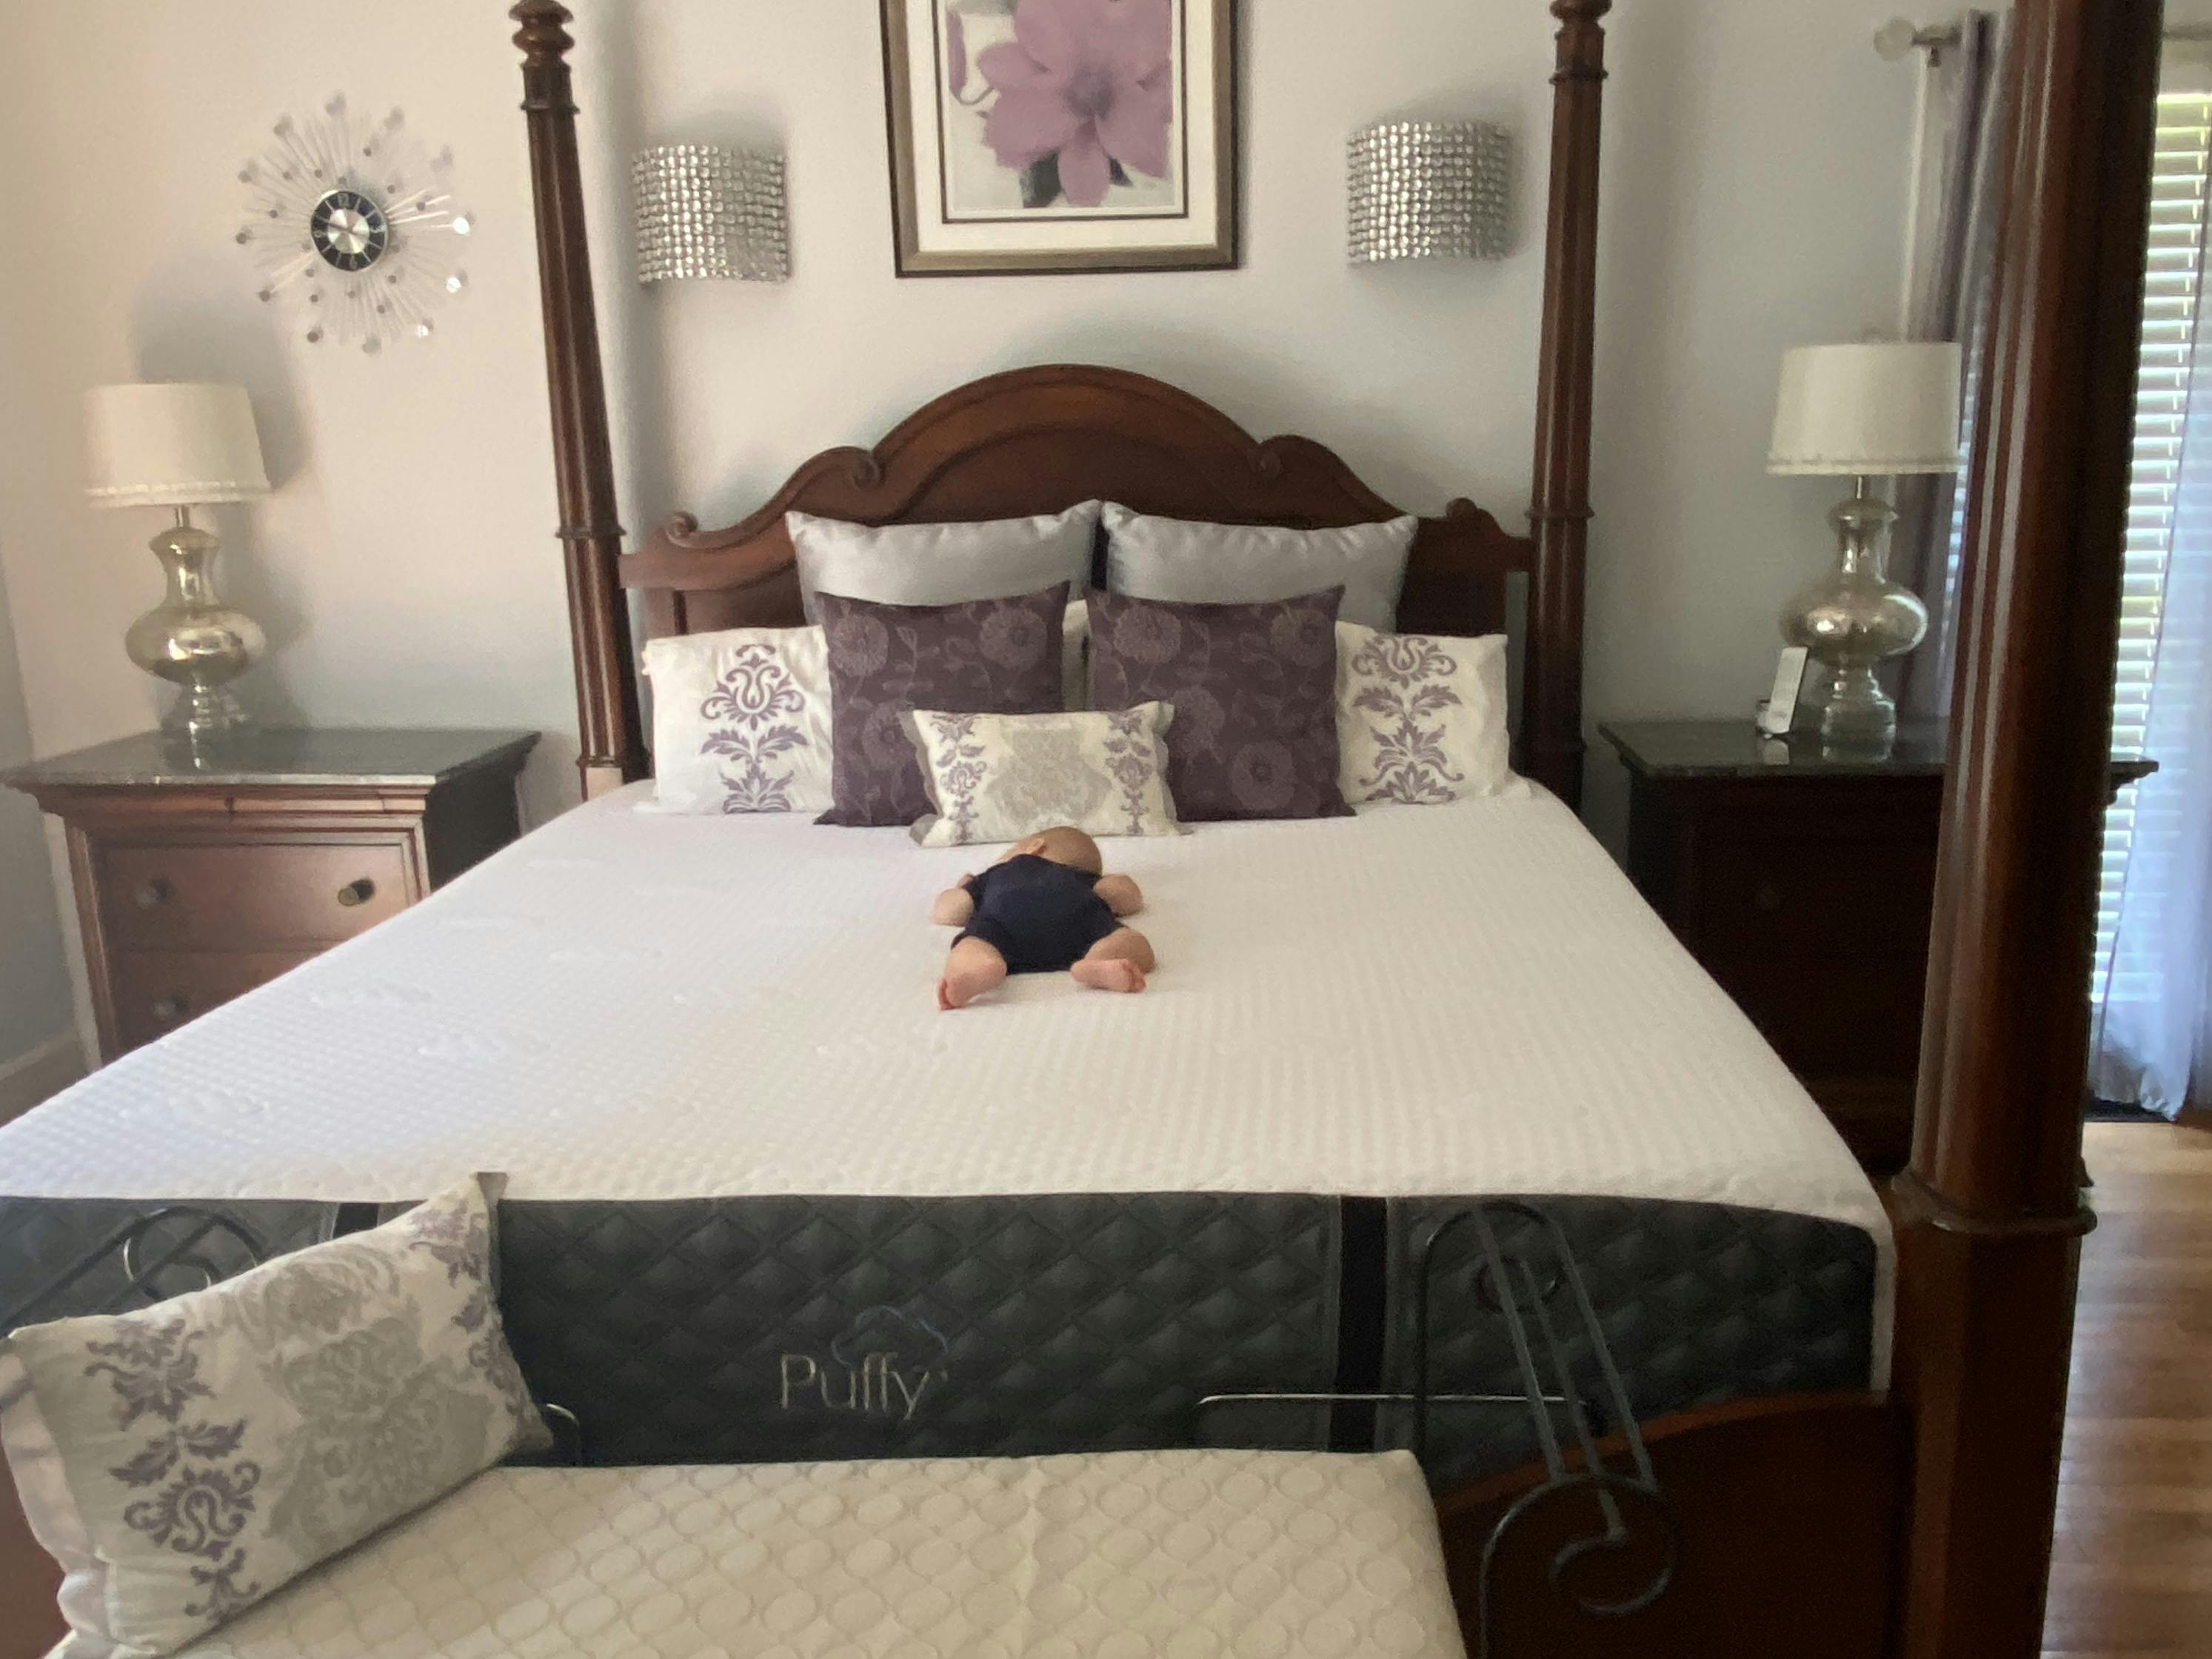 customer reviews on puffy lux mattress